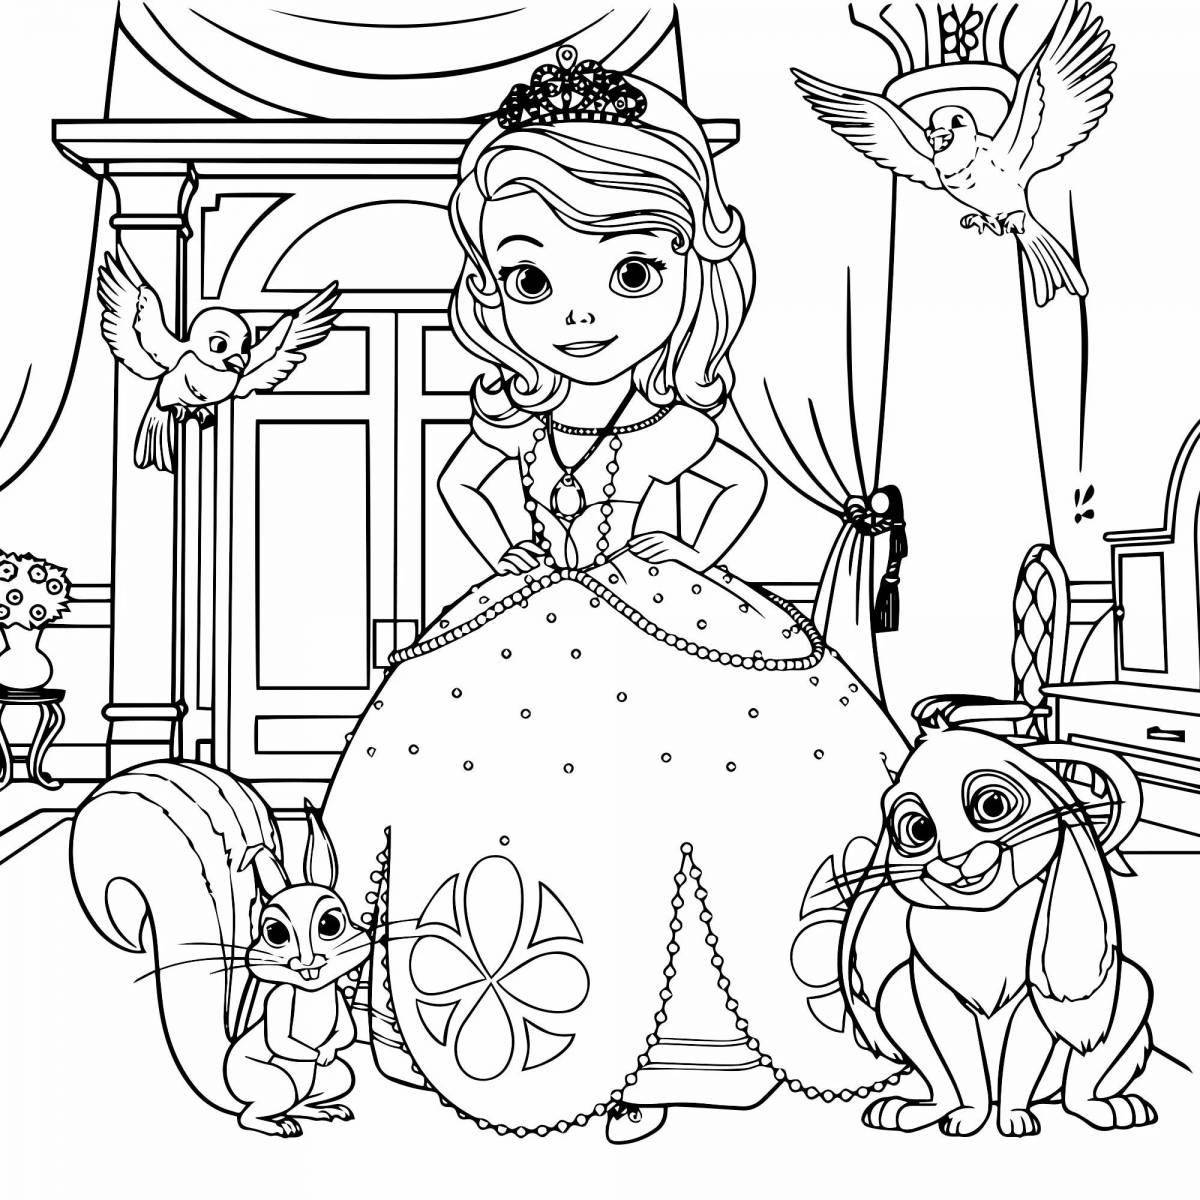 Amazing coloring pages with little princesses